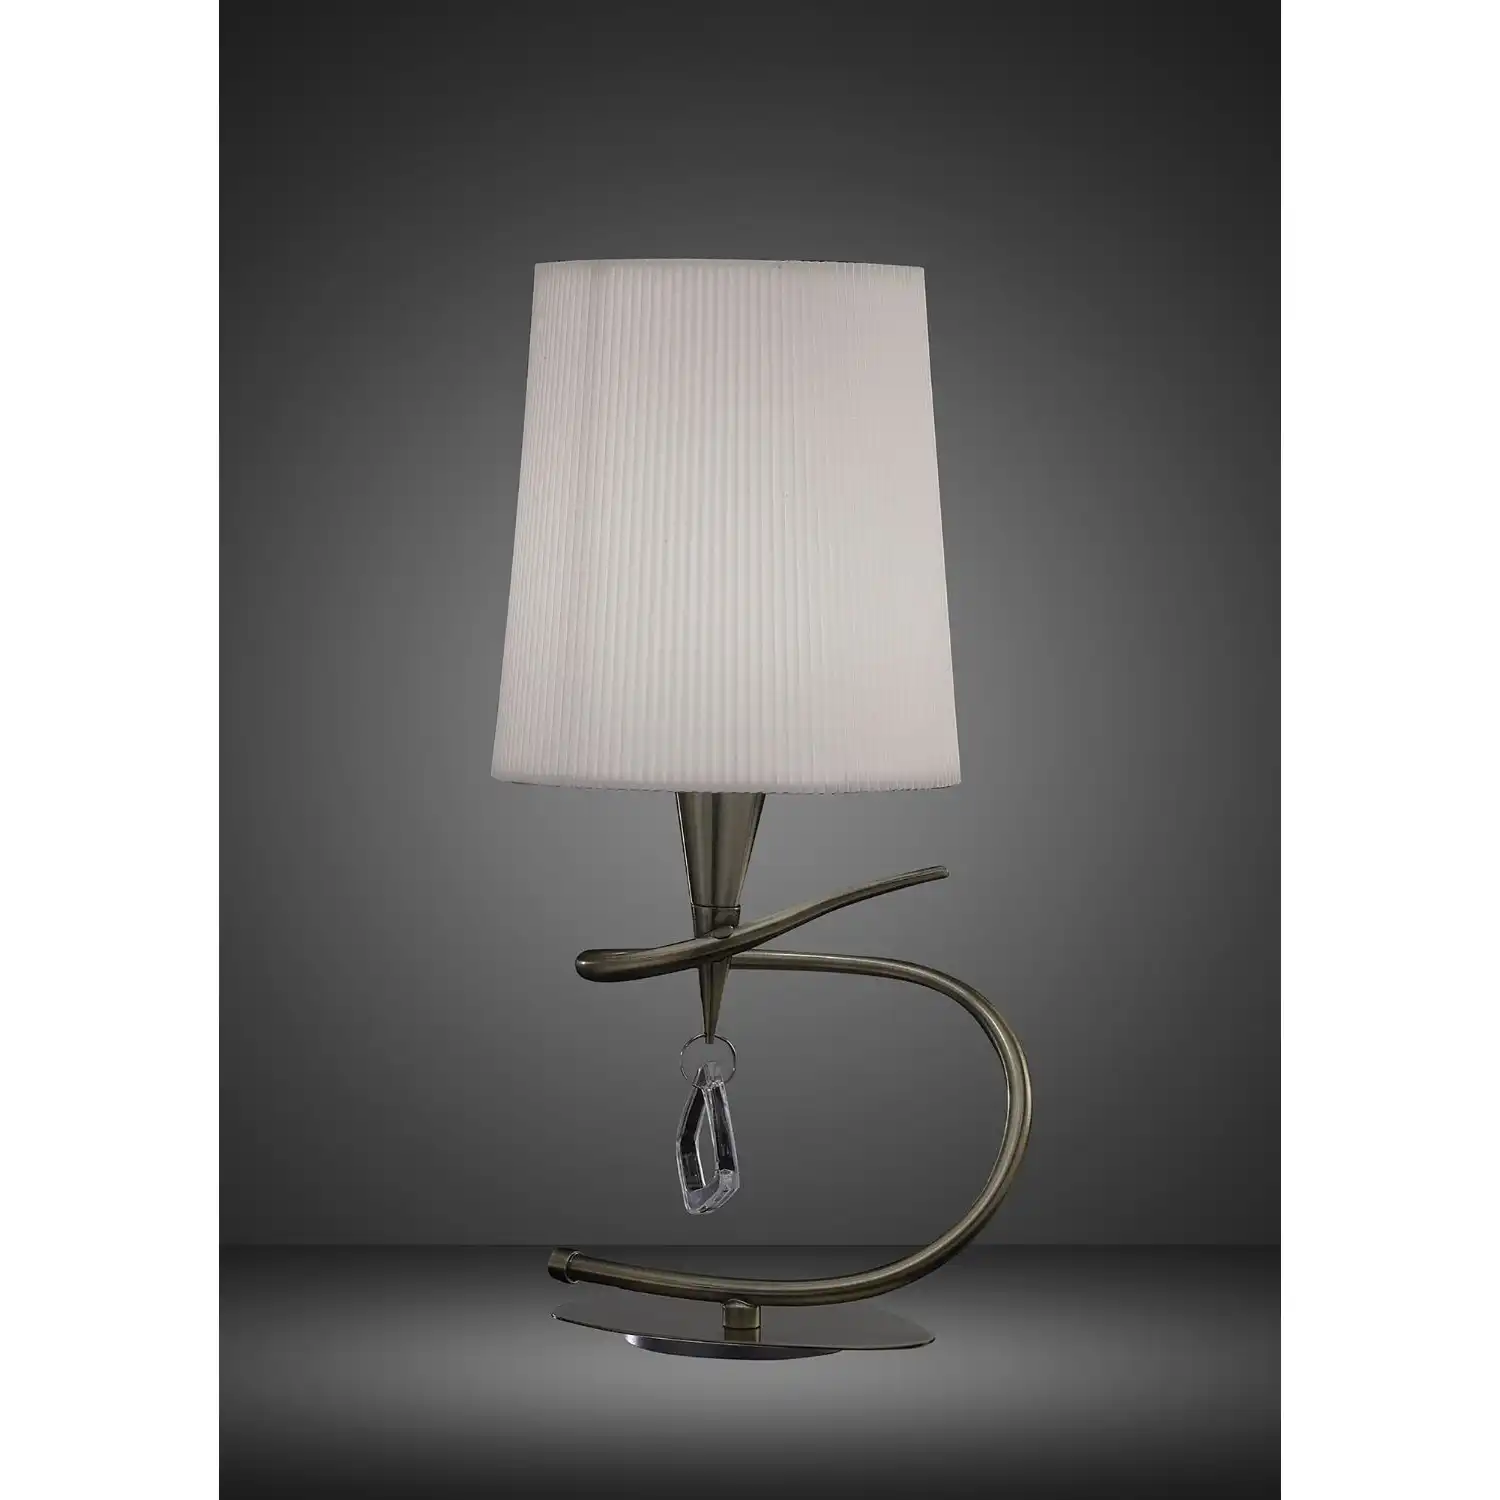 Mara Table Lamp 1 Light E14 Small, Antique Brass With Ivory White Shade